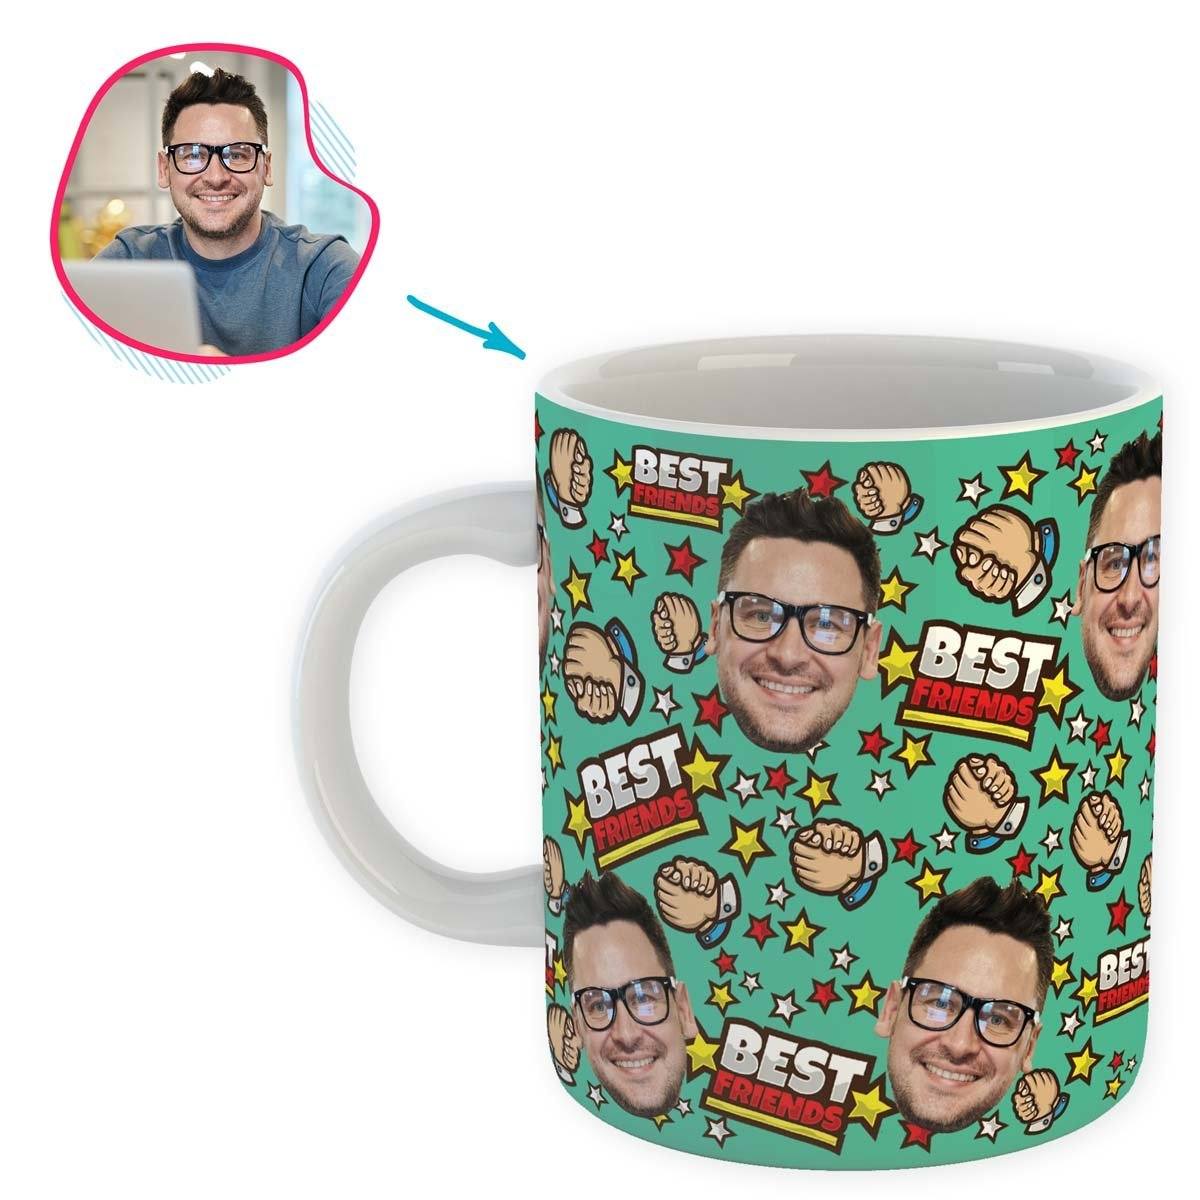 mint Best Friends mug personalized with photo of face printed on it